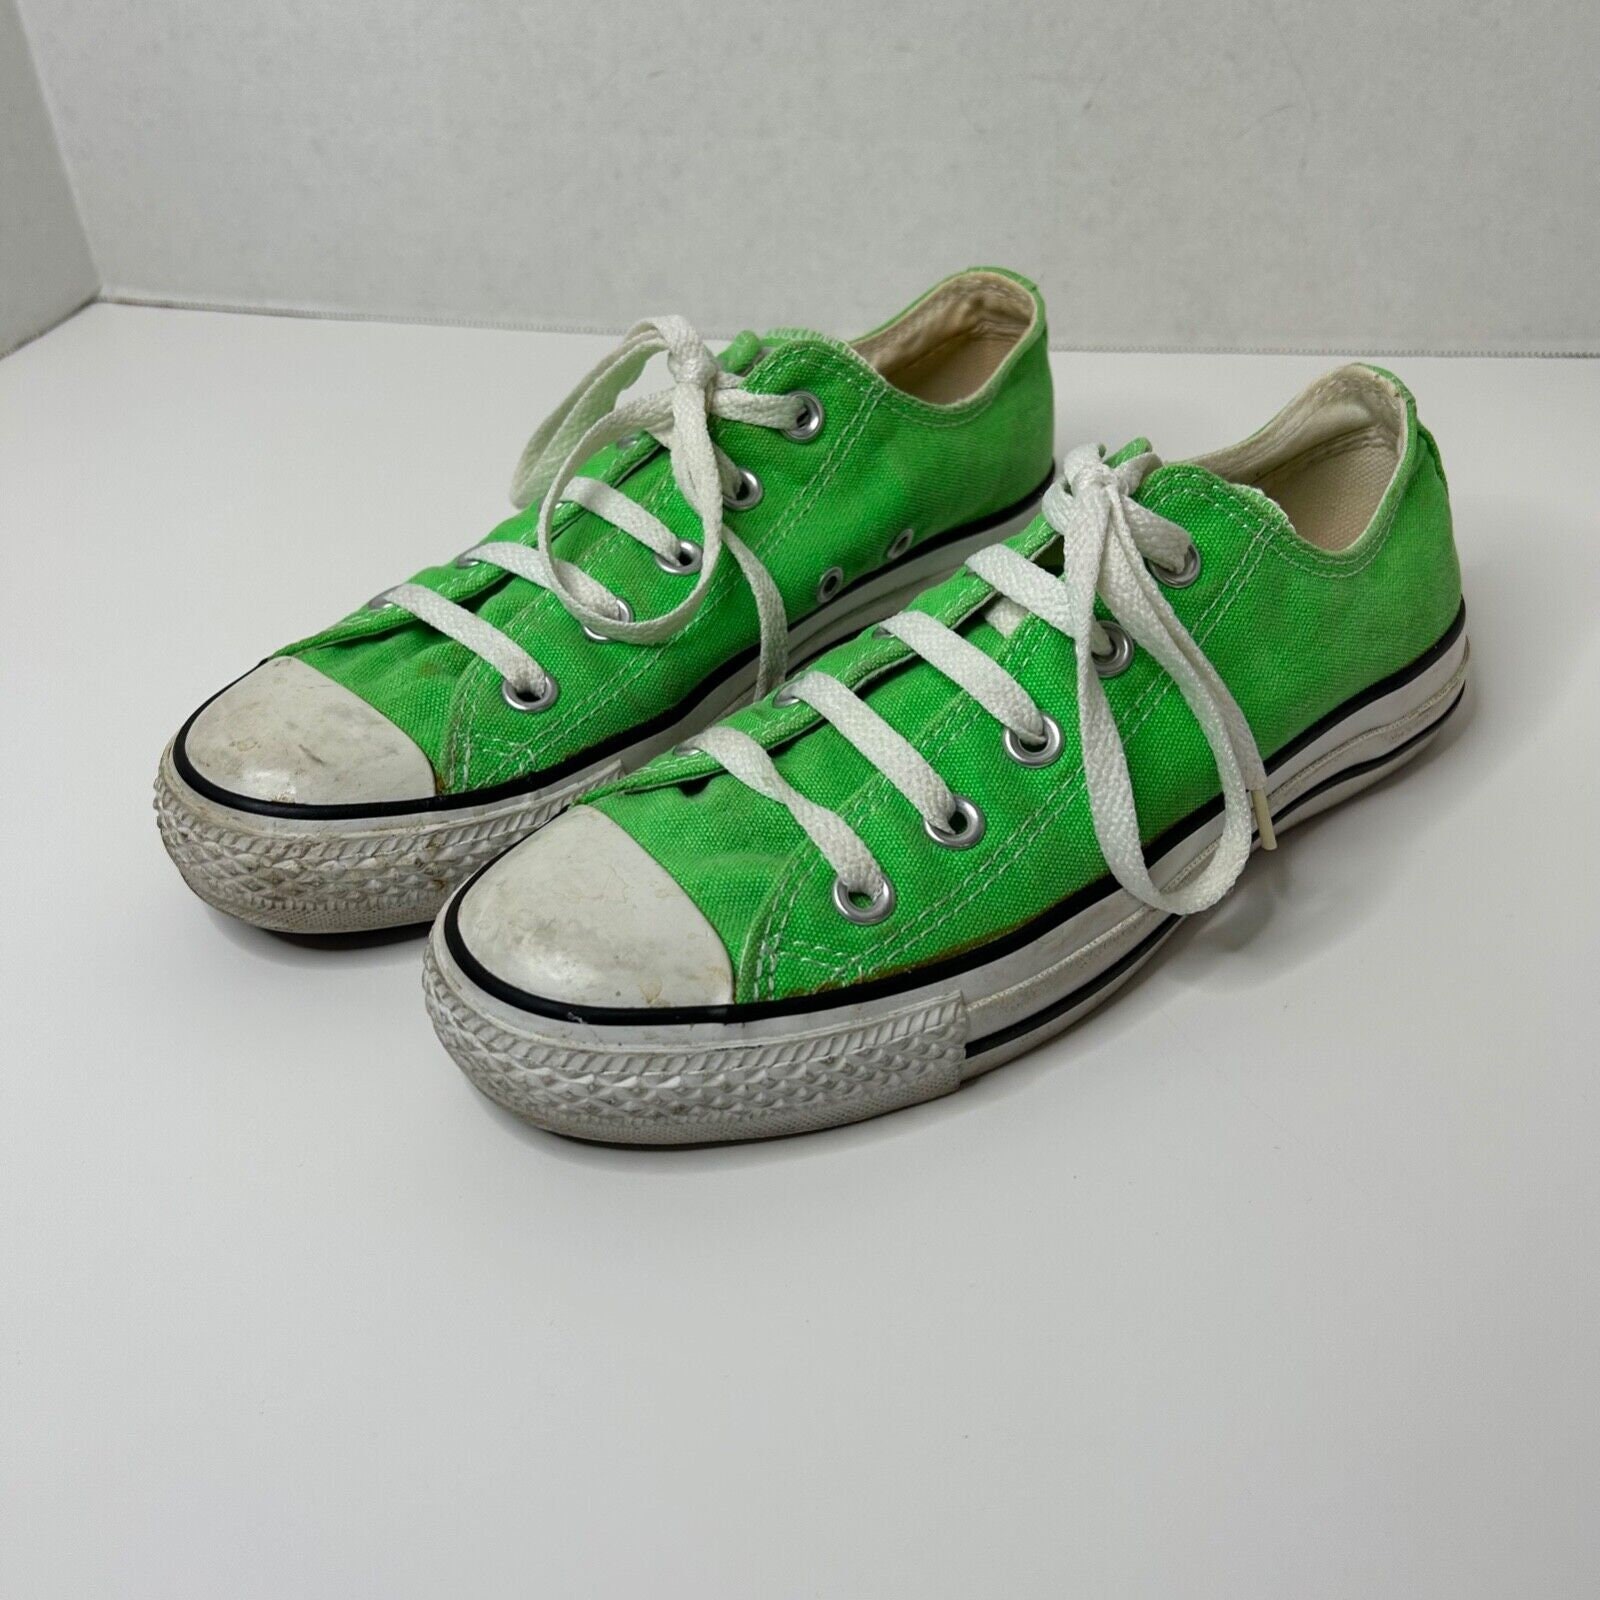 Converse Neon Lime Green Low Tops Sneakers Shoes Size 6 Etsy Norway